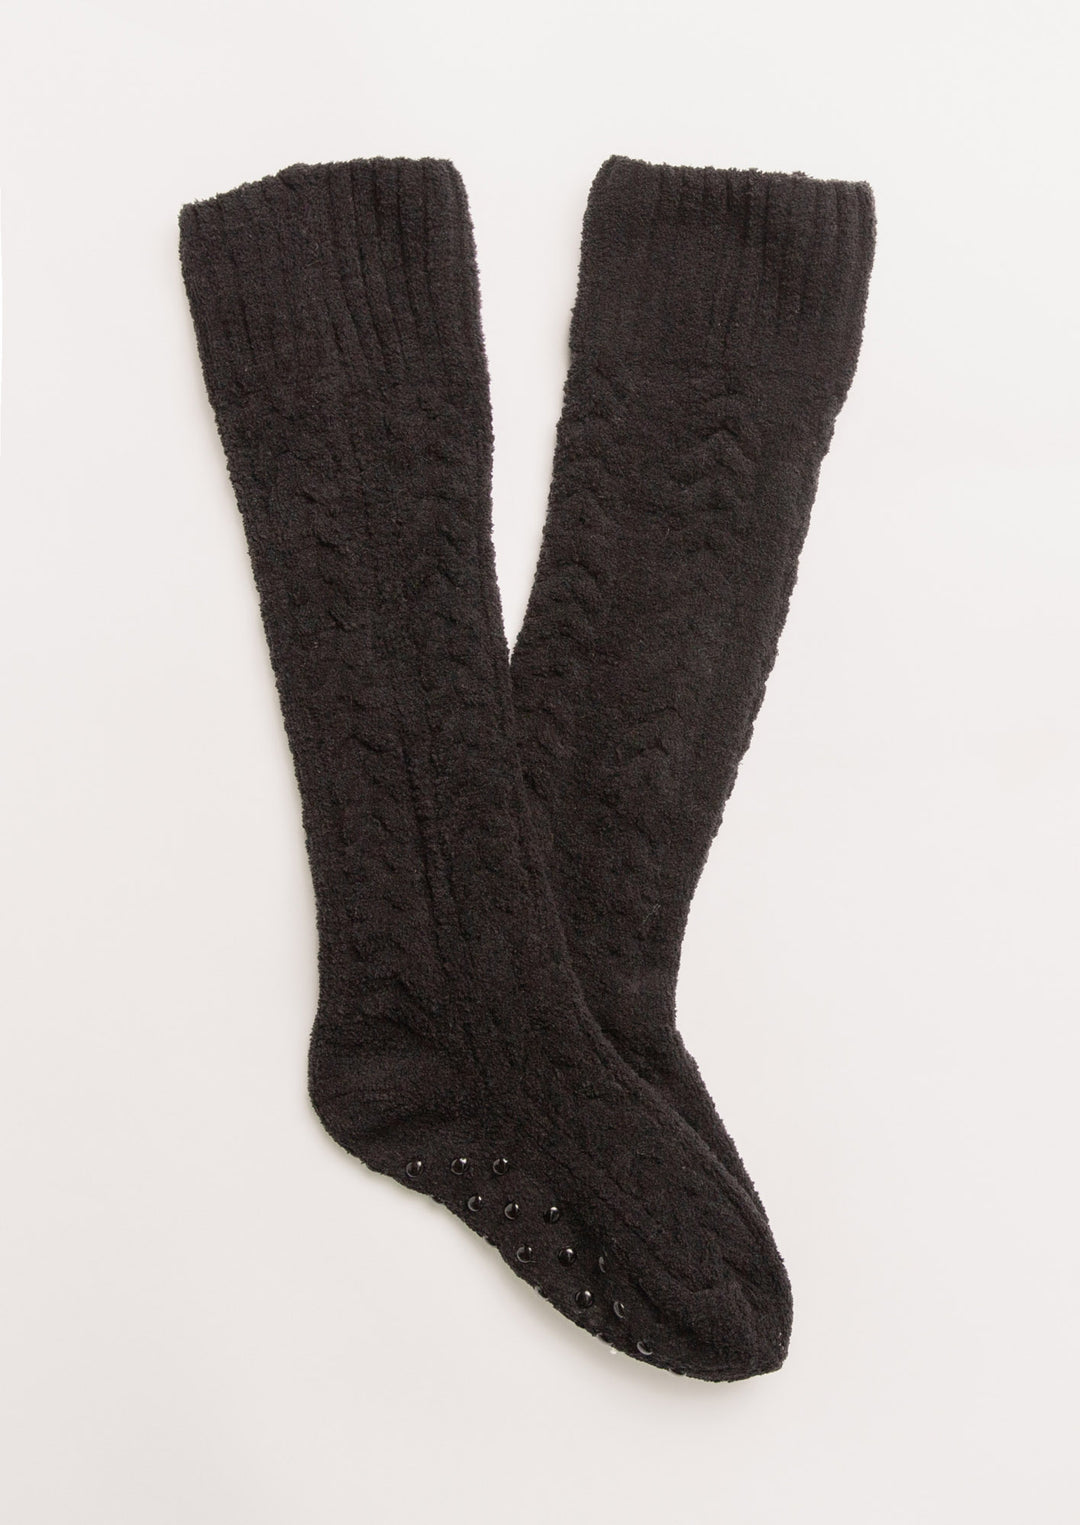 Cozy knee socks in black cable-textured chenille with bottom grippers for non-slip feet. (7231865487460)